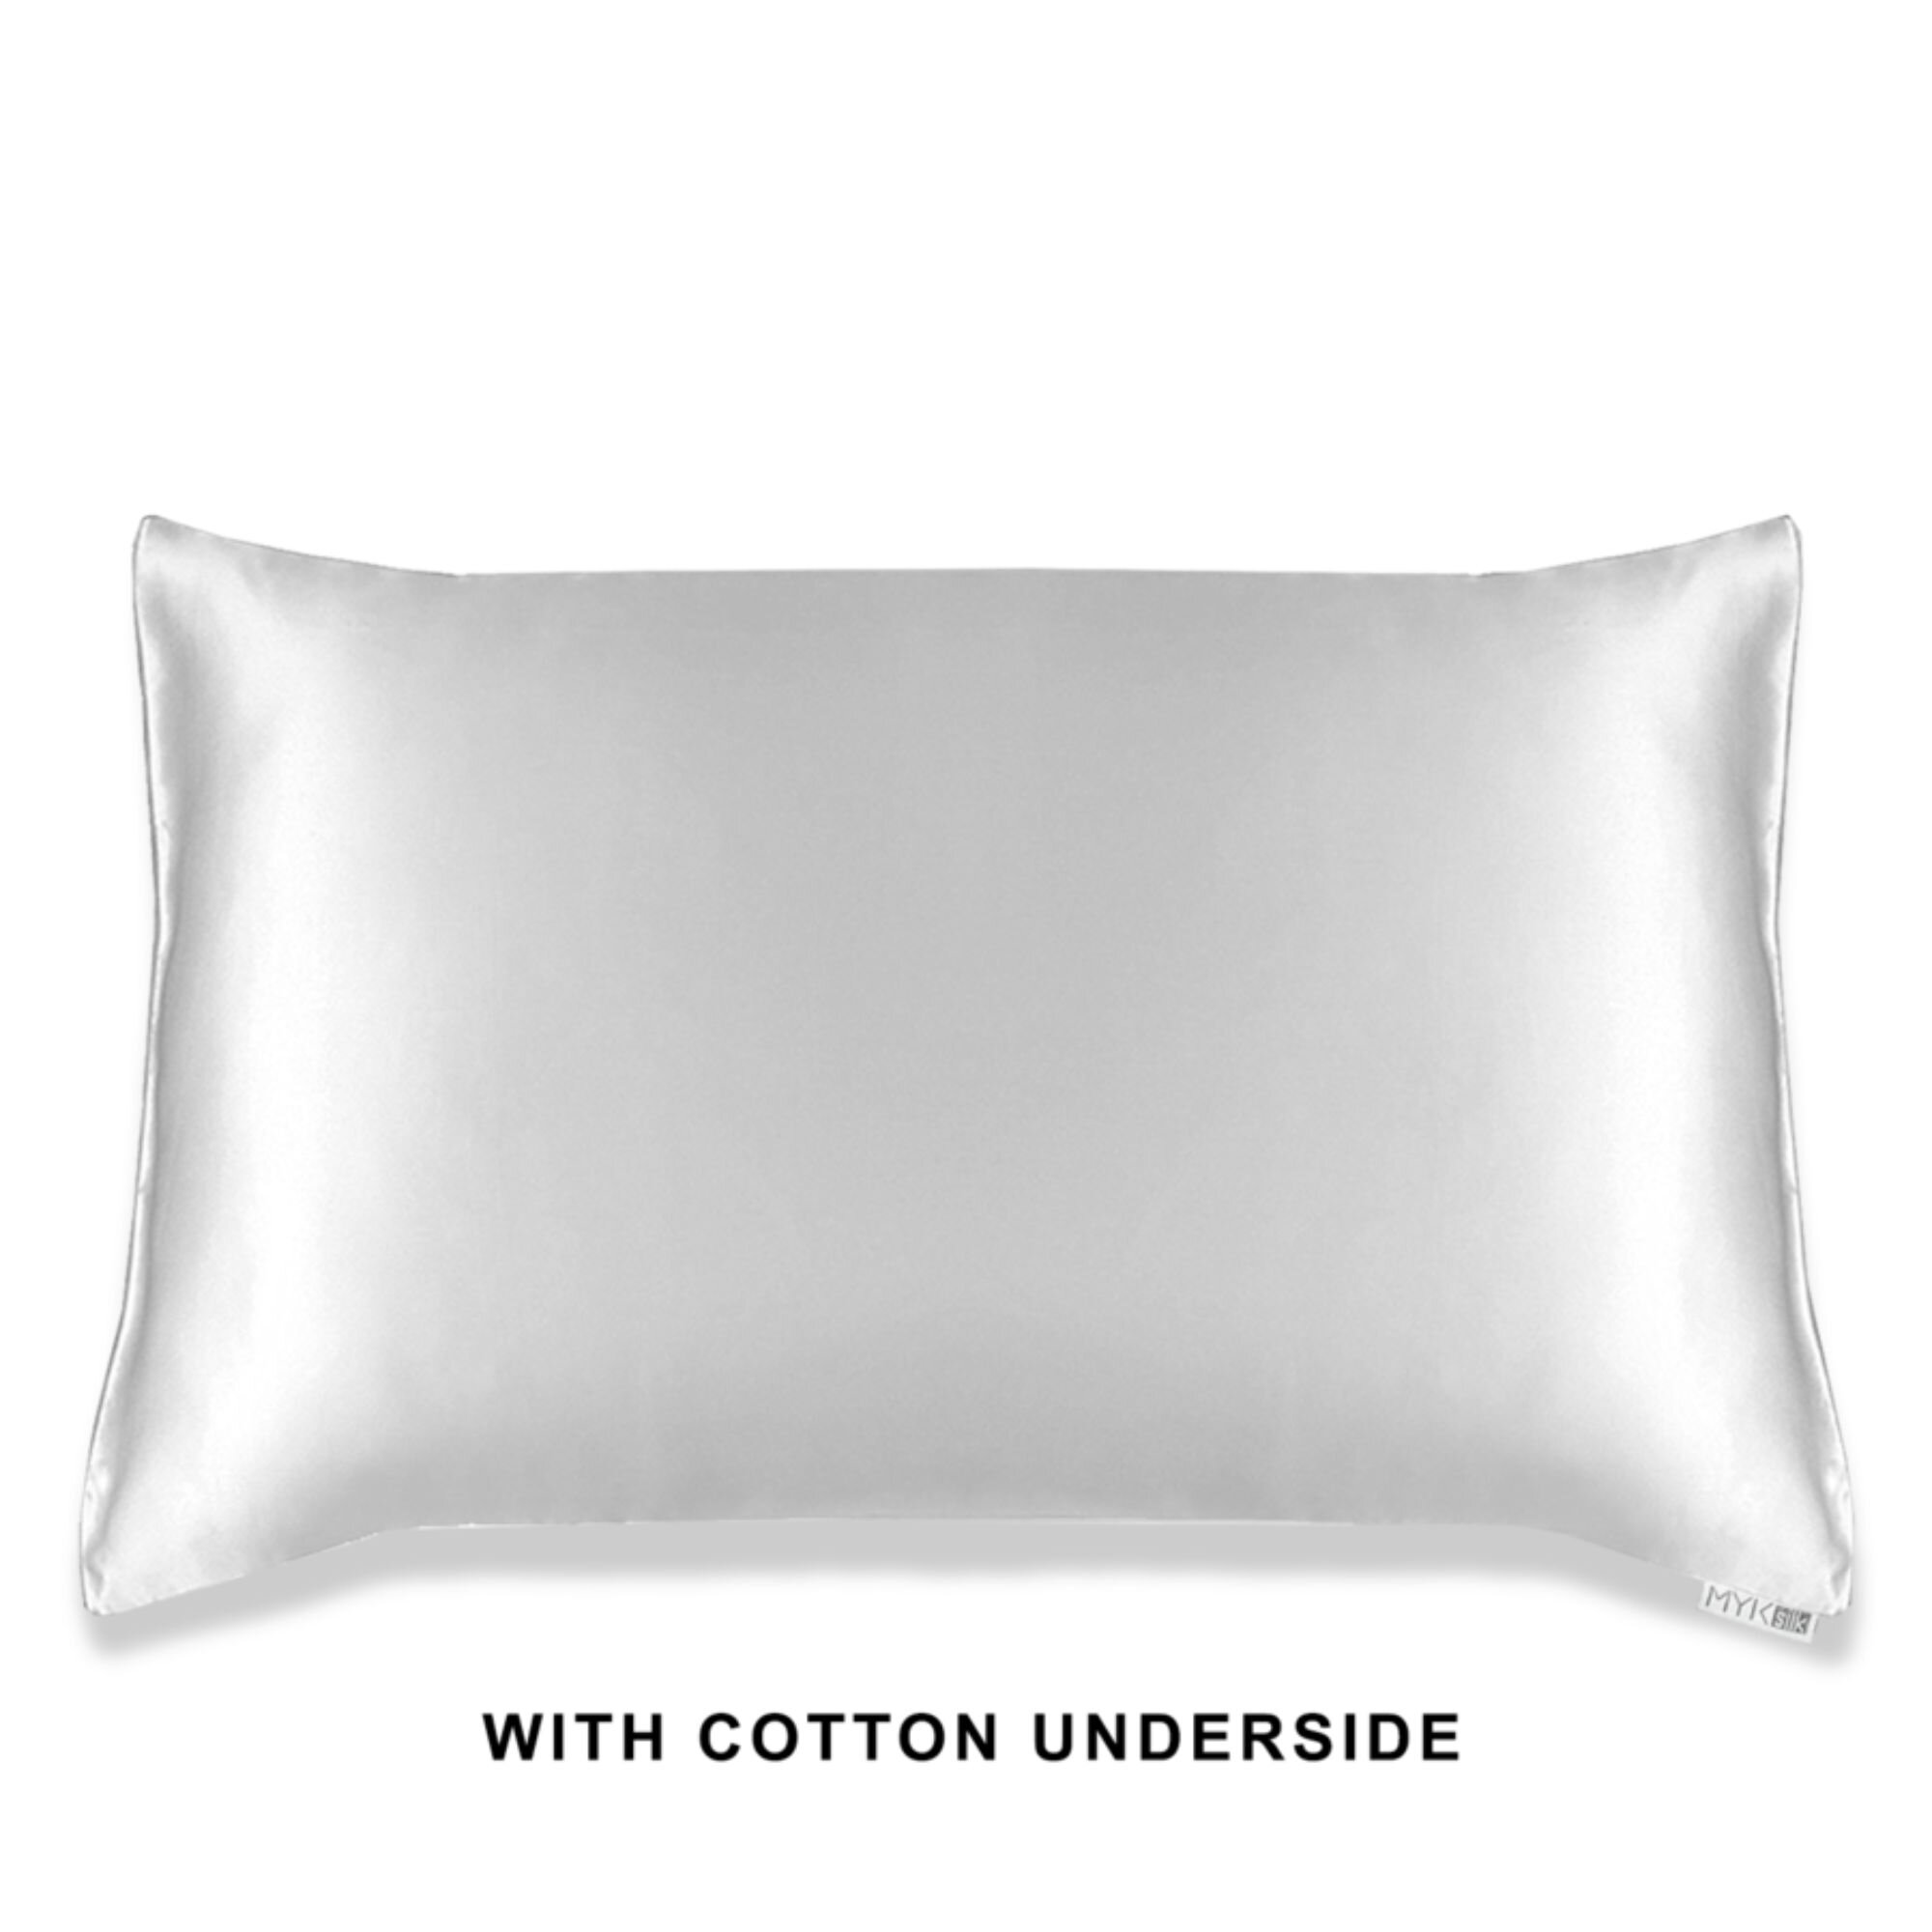 Kimberly Basics Plain Color Throw Pillow Covers. Solid Color